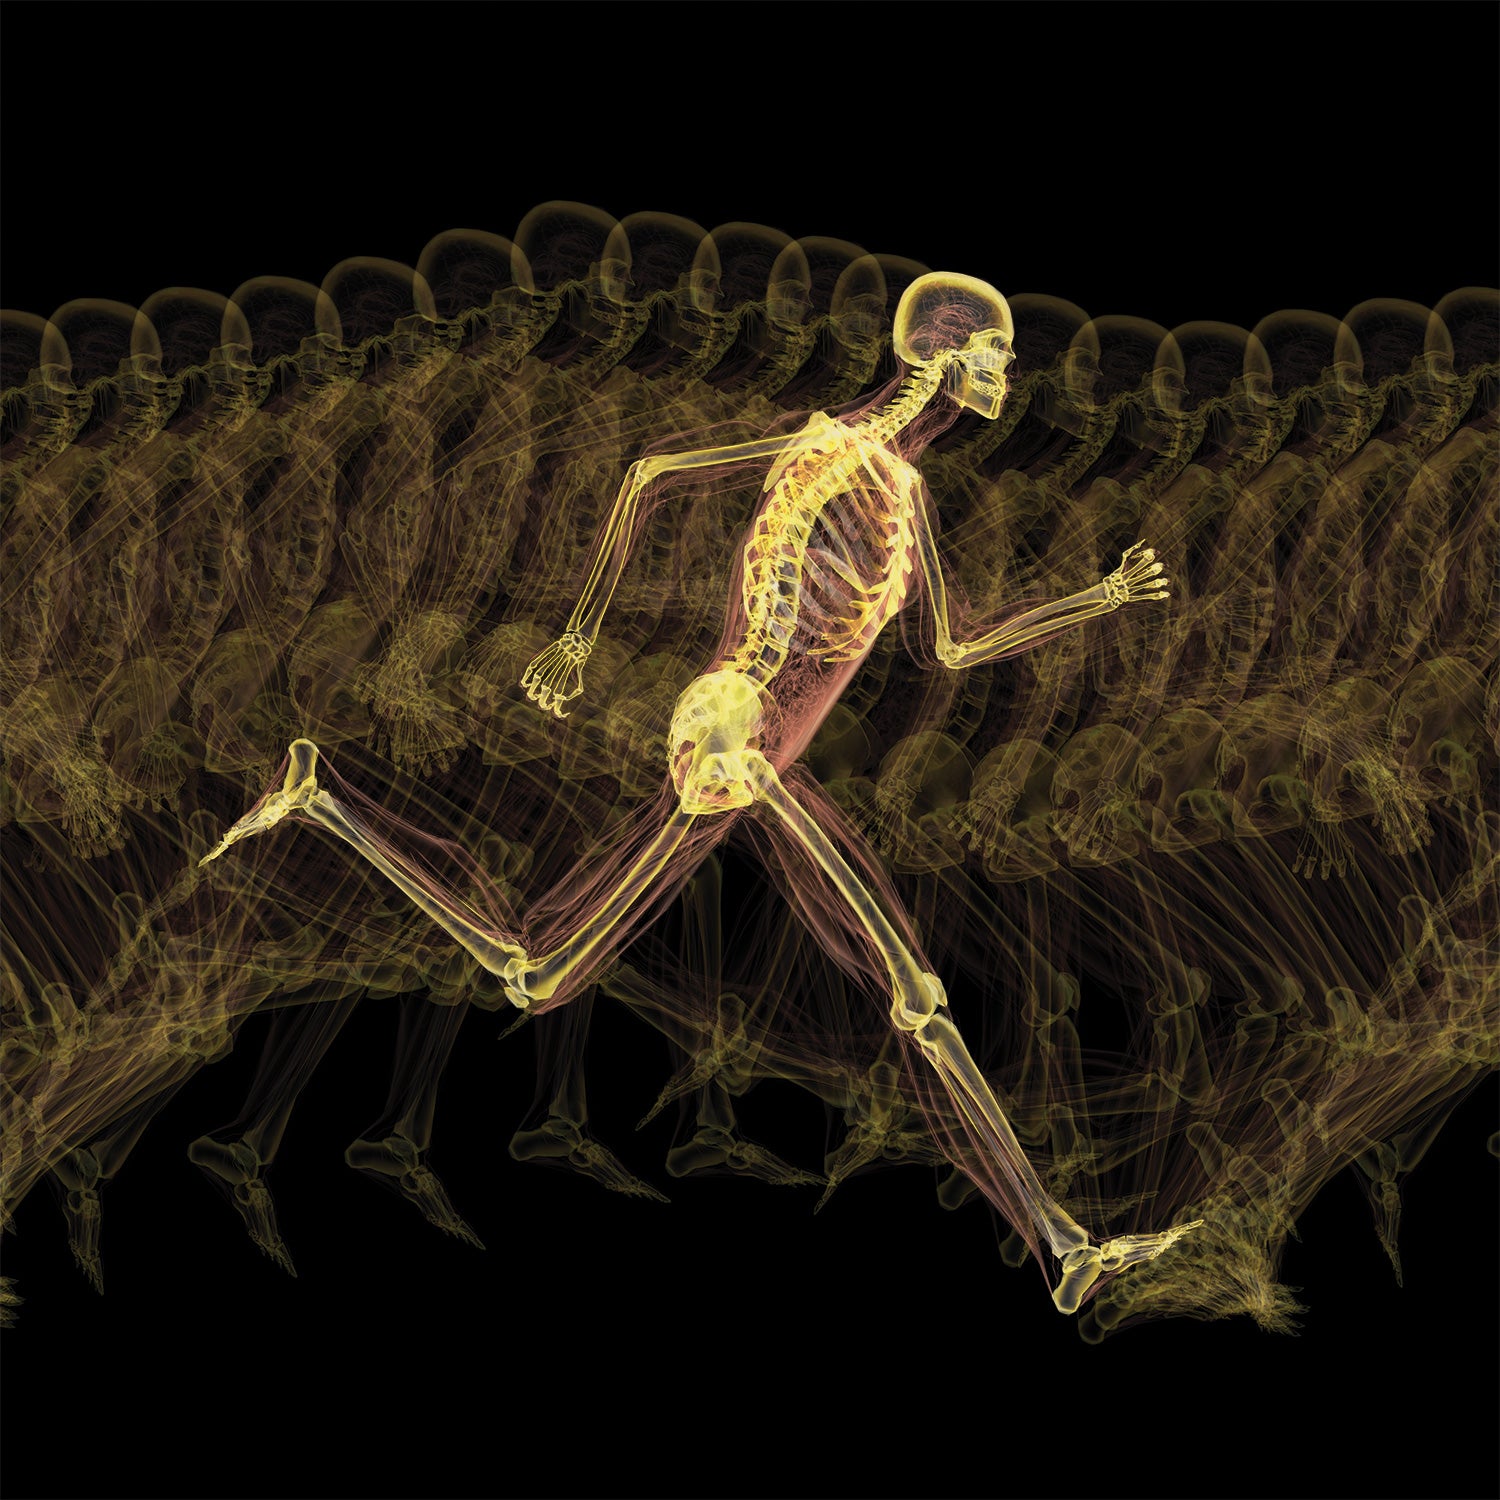 Humans Evolved to Exercise - Scientific American